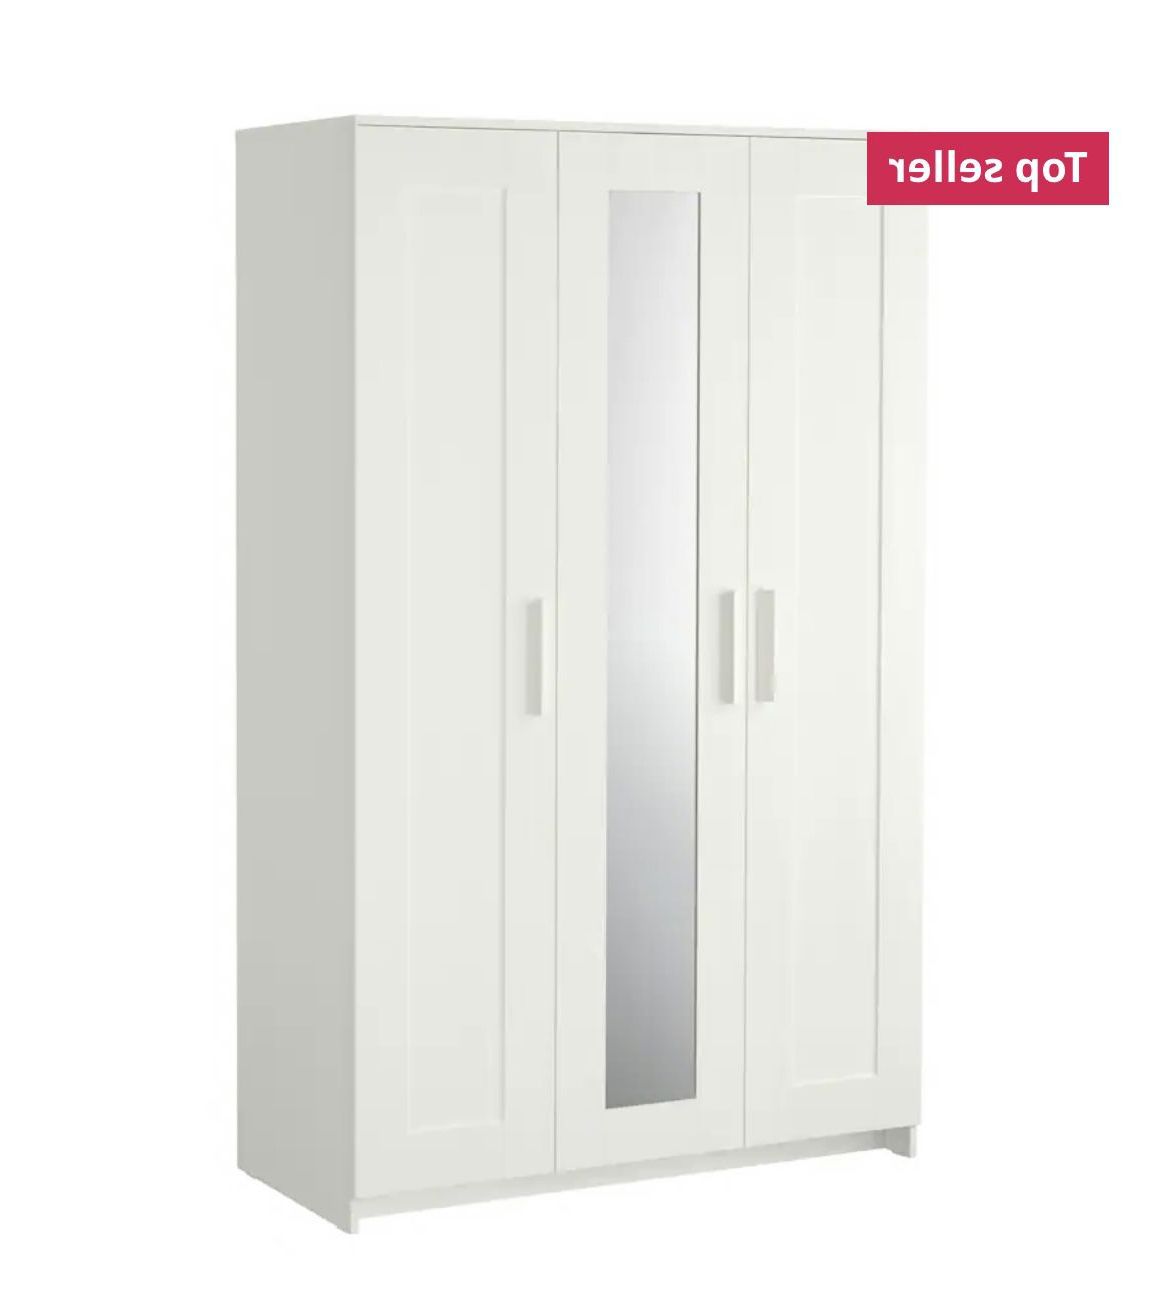 Ikea Brimnes 3 Door Wardrobe W/ Mirror (2 Available) – $175/each For Sale  In Brooklyn, Ny – Offerup Pertaining To White 3 Door Wardrobes With Mirror (Gallery 15 of 20)